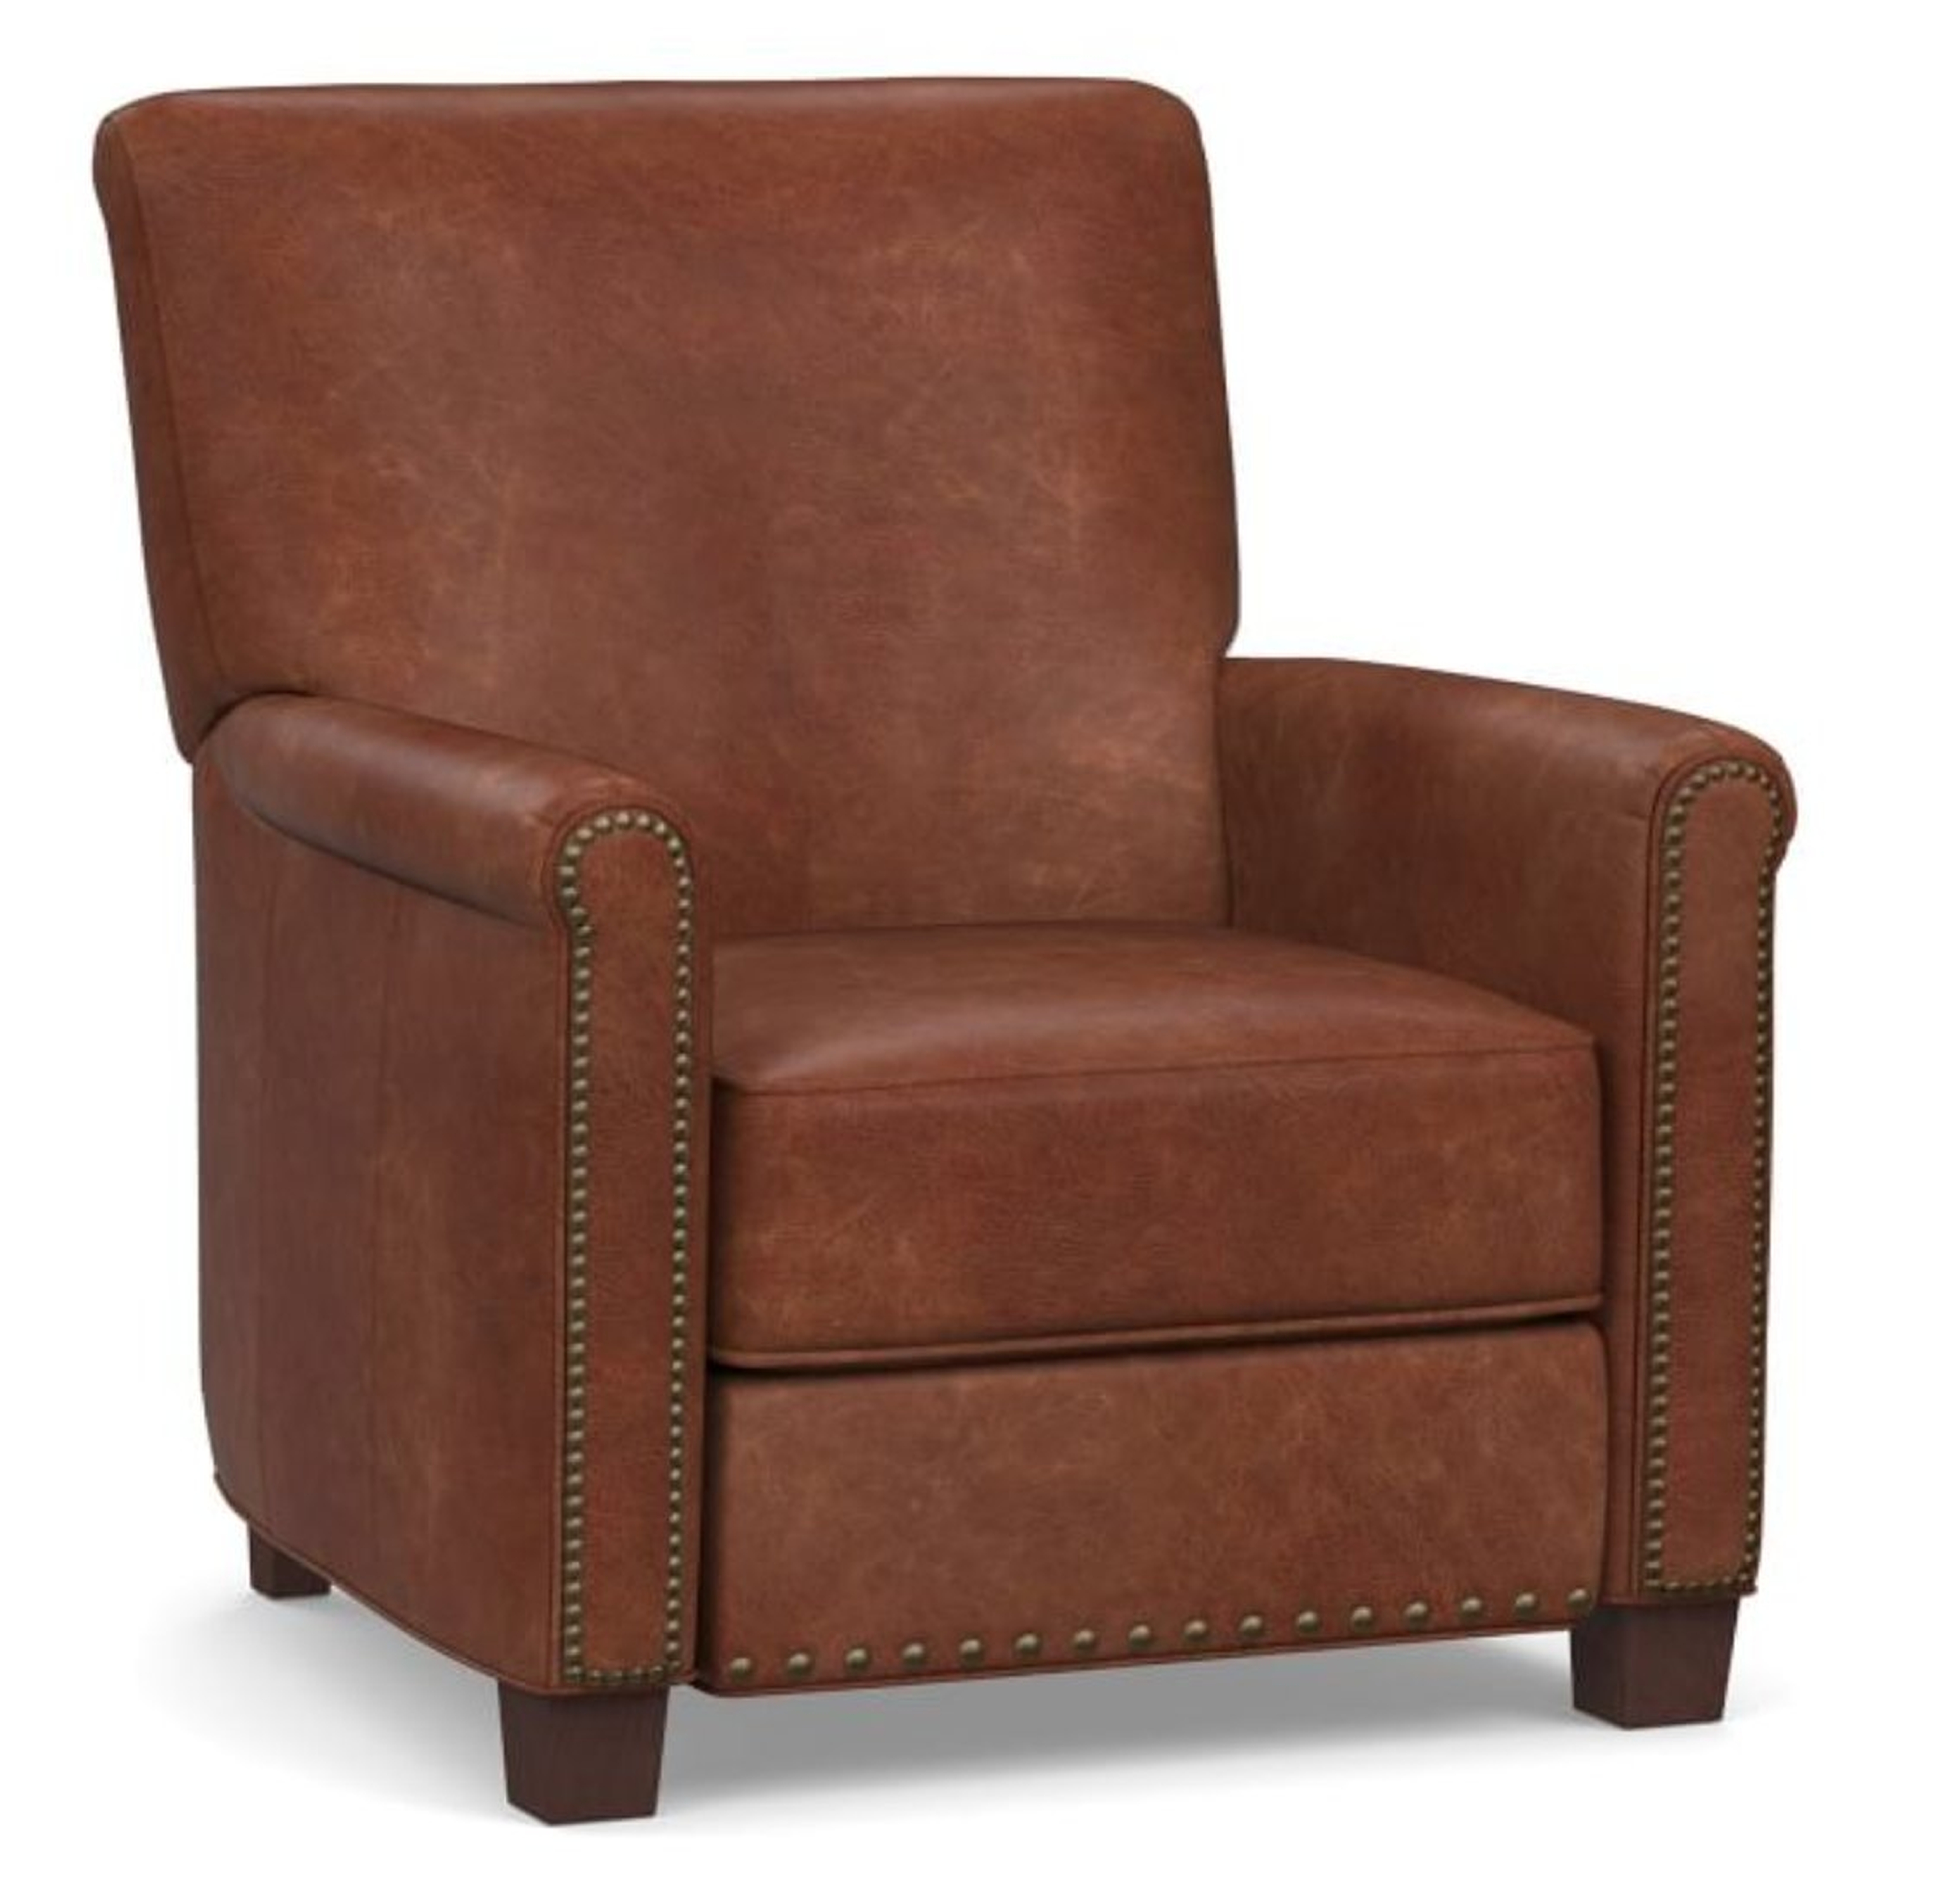 Irving Roll Arm Leather Armchair with Bronze Nailheads, Polyester Wrapped Cushions, Statesville Molasses - Pottery Barn